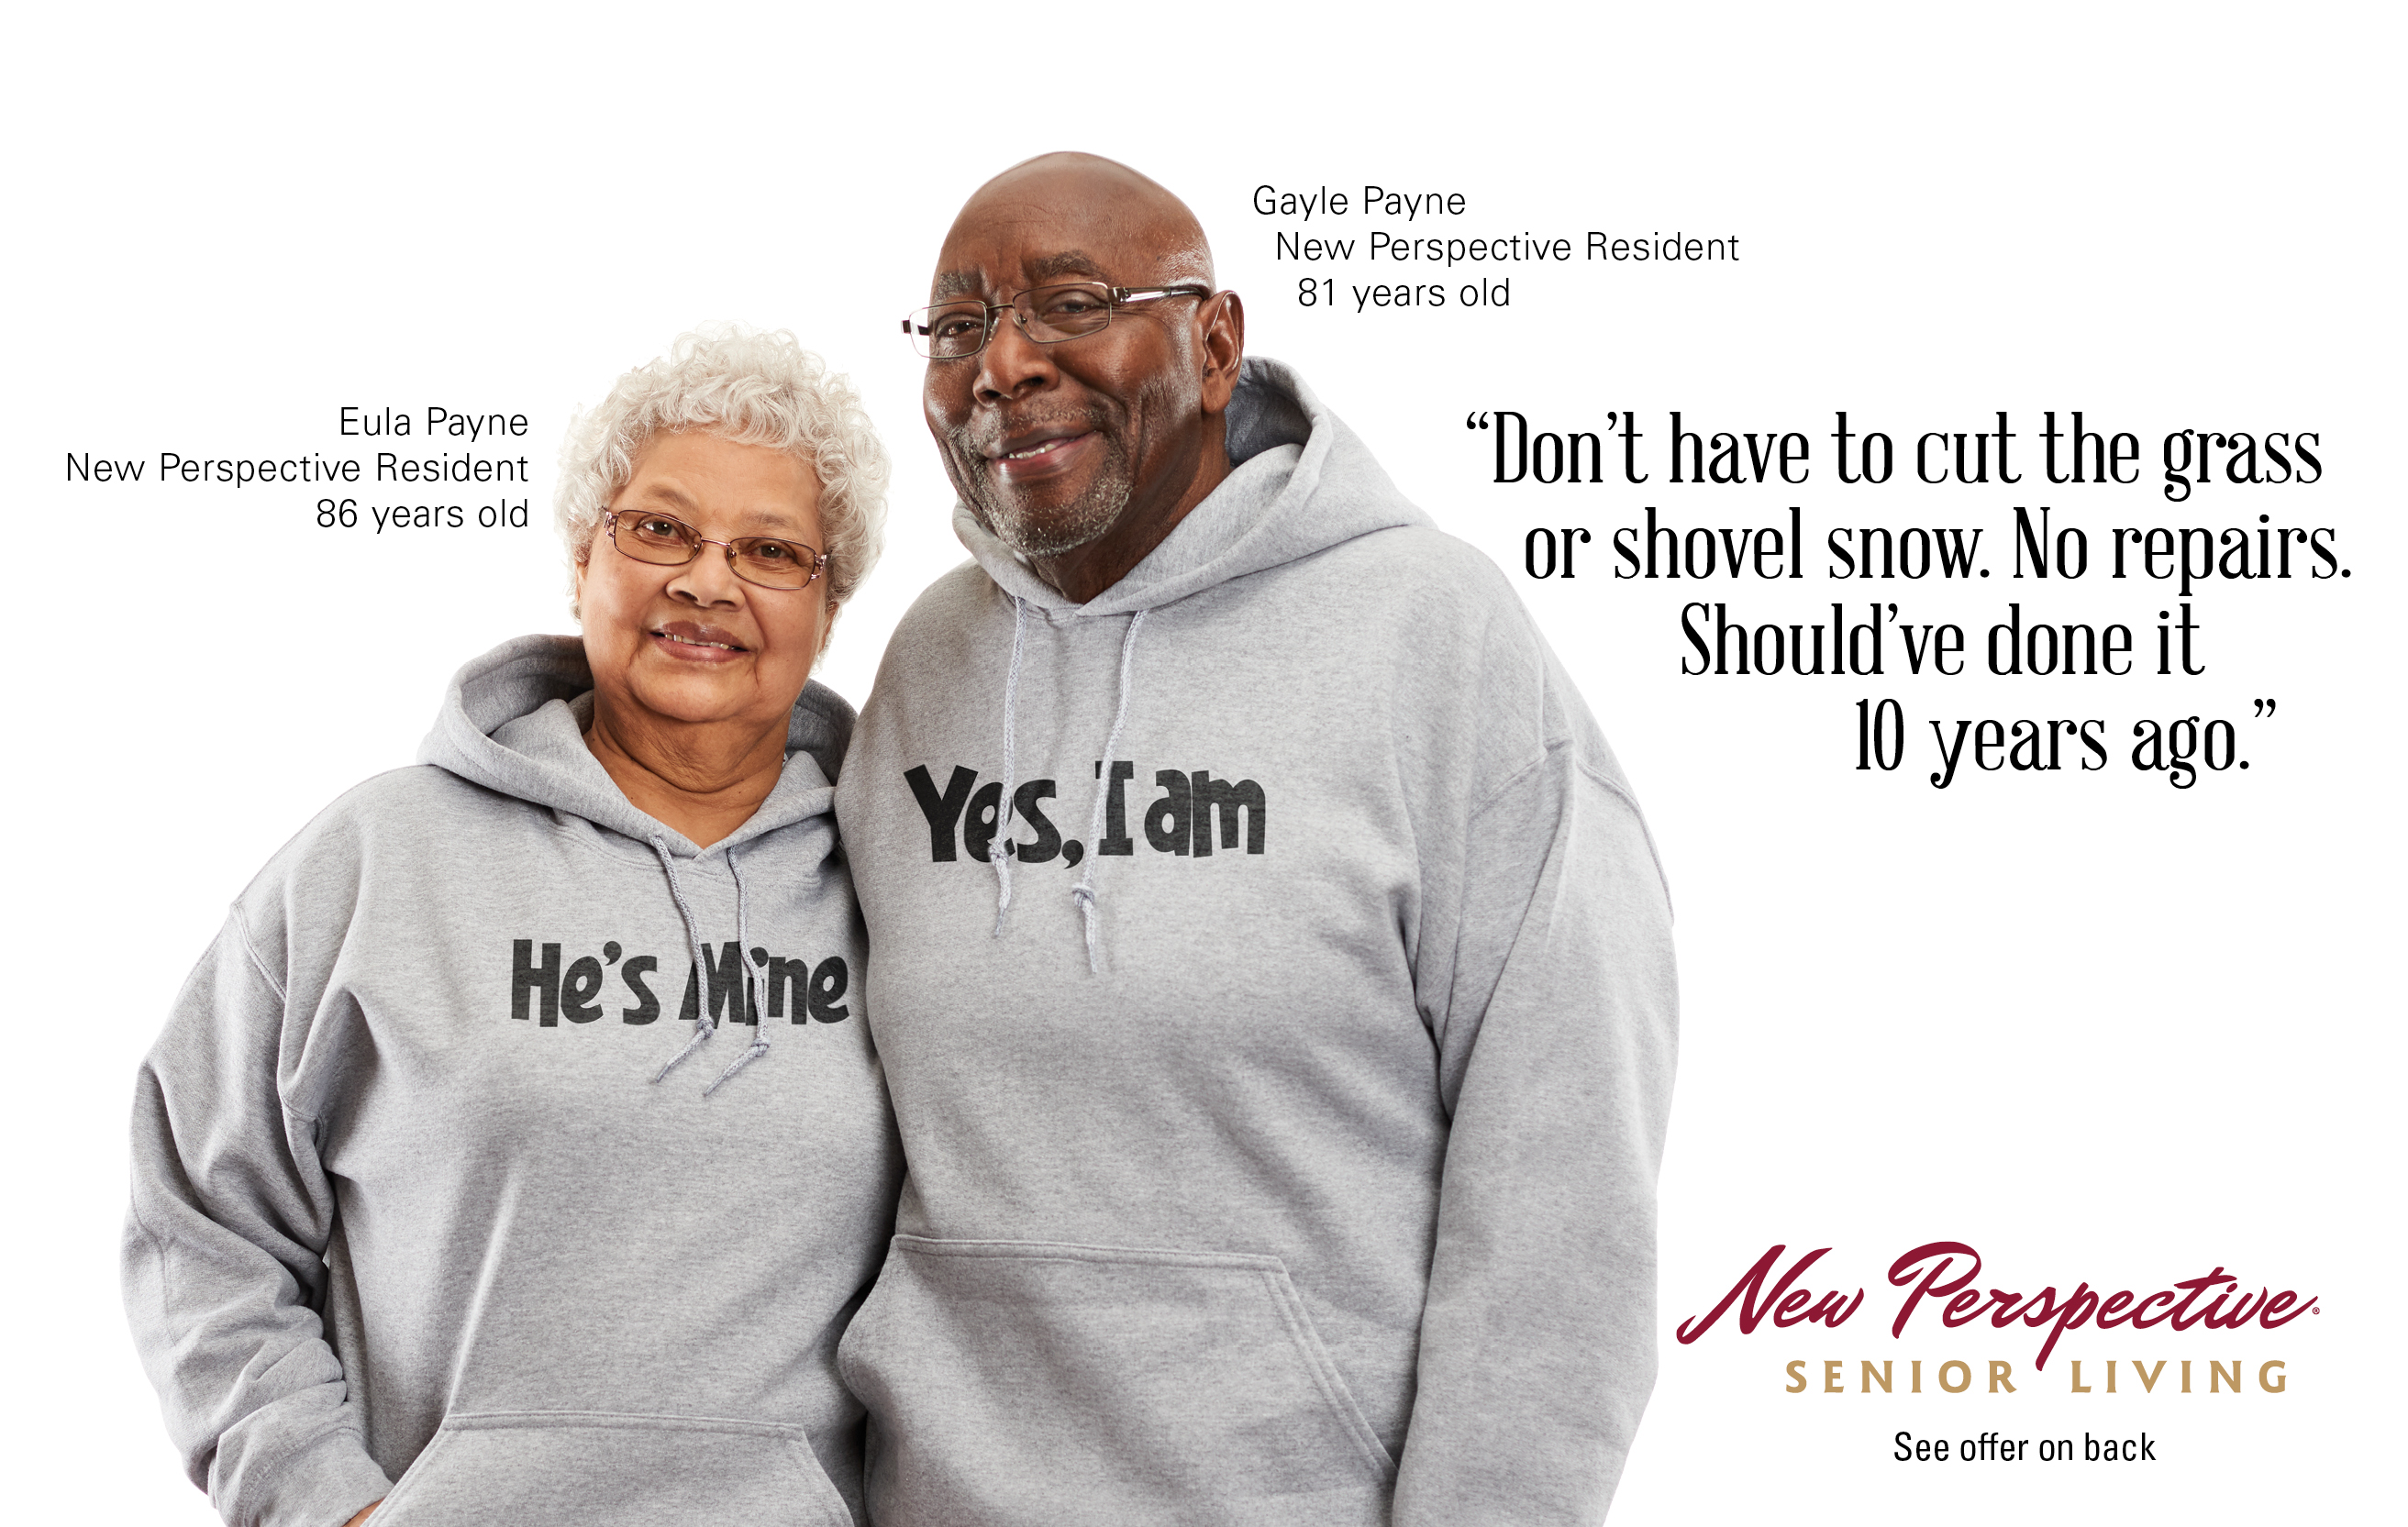 New Perspective Senior Living Campaign Showcases Actual Residents